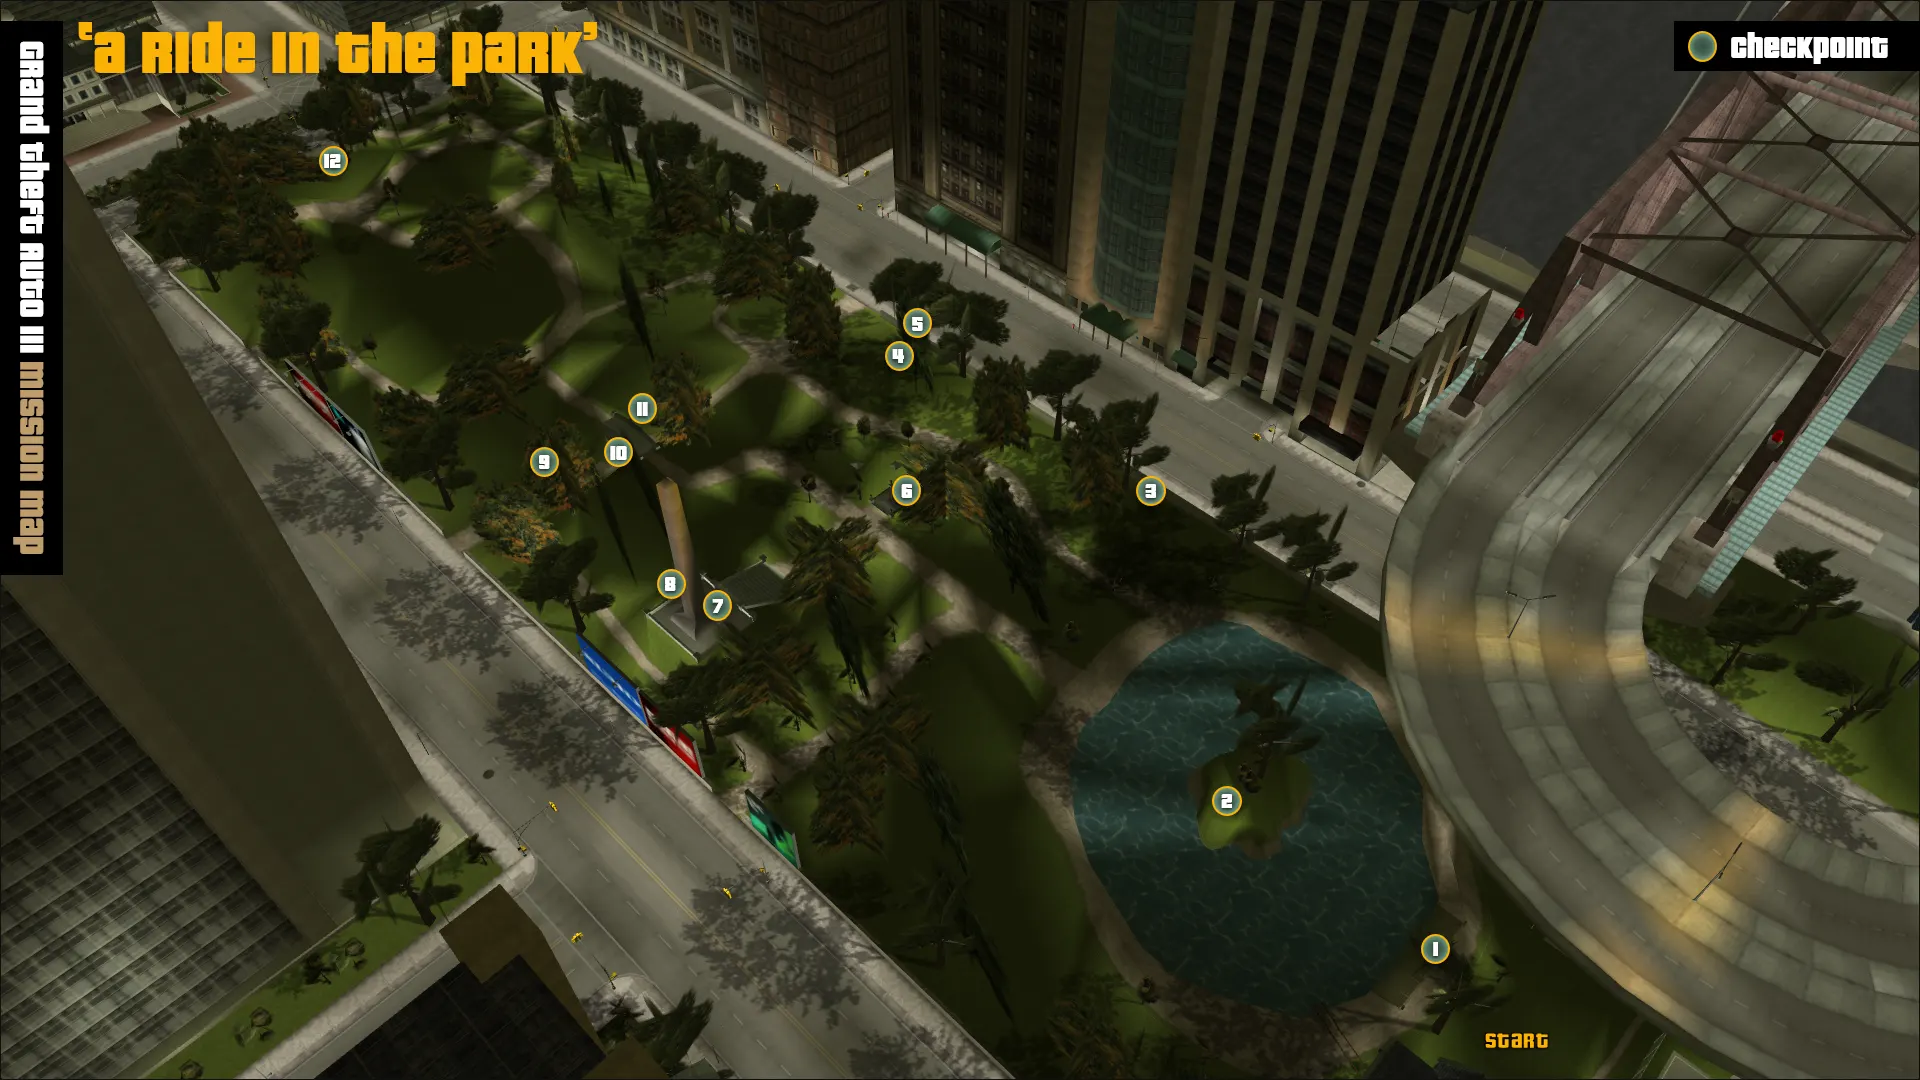 Grand Theft Auto III Off-Road Mission - A Ride In The Park.